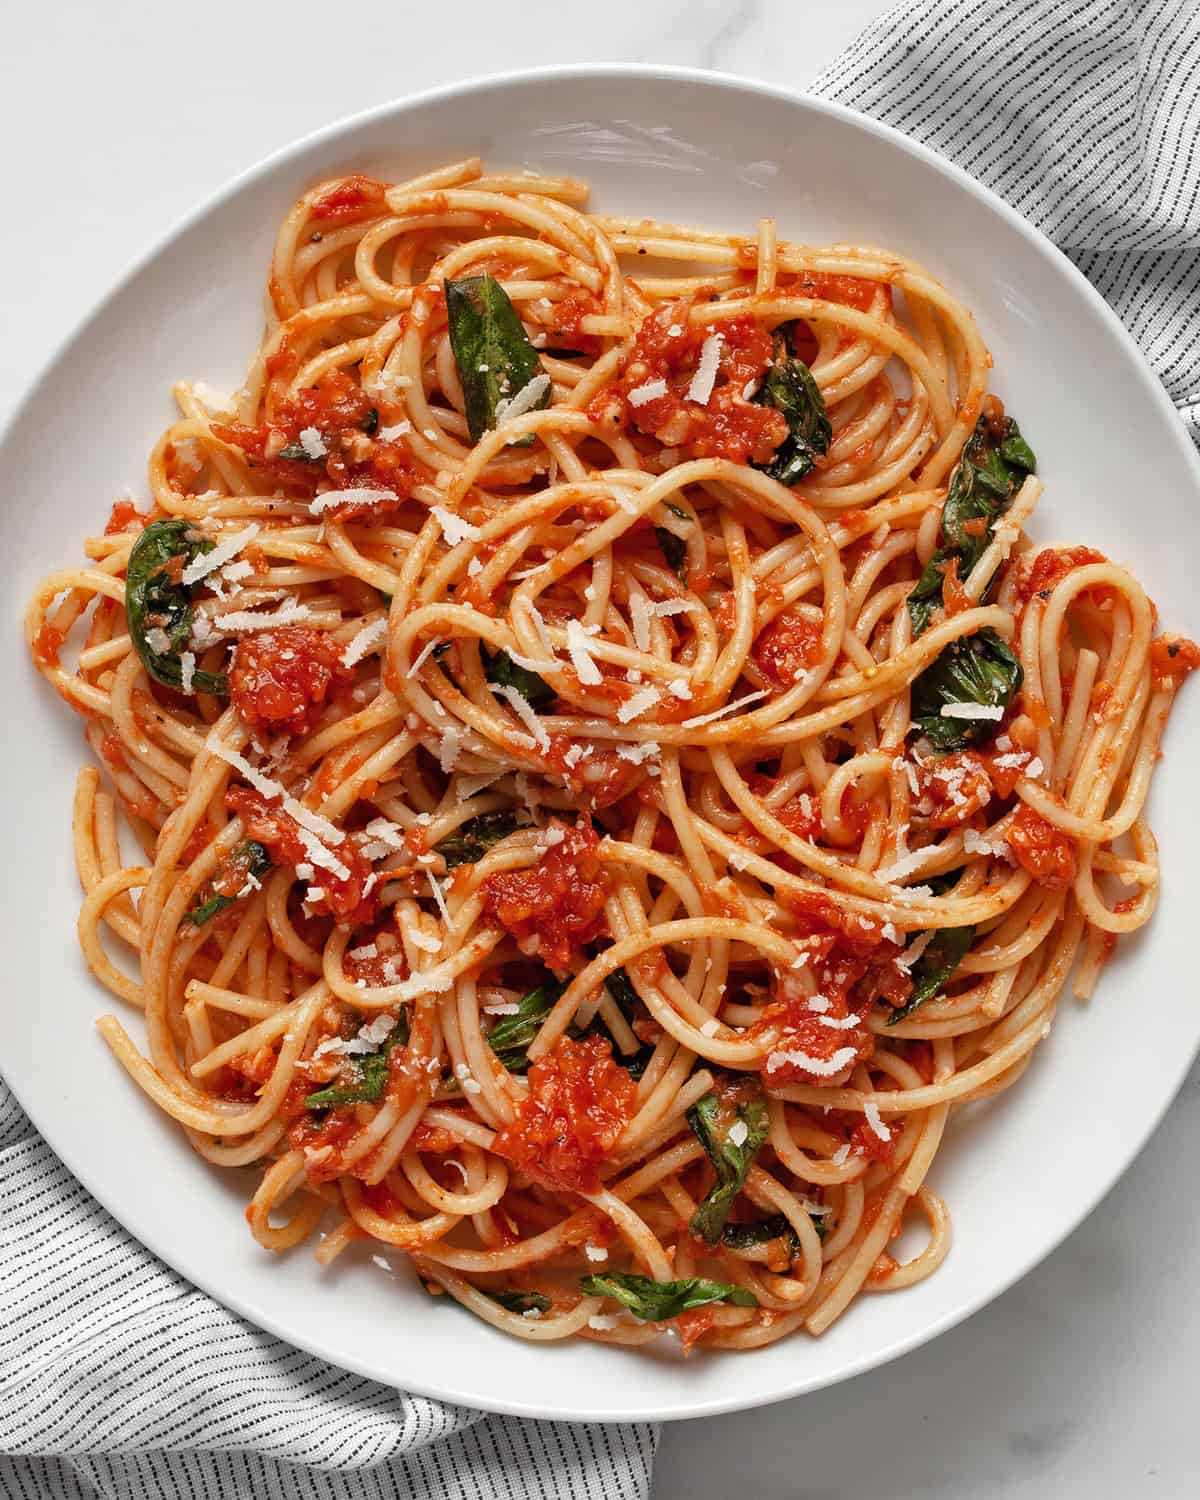 Pasta with fresh tomato sauce and basil on a plate.